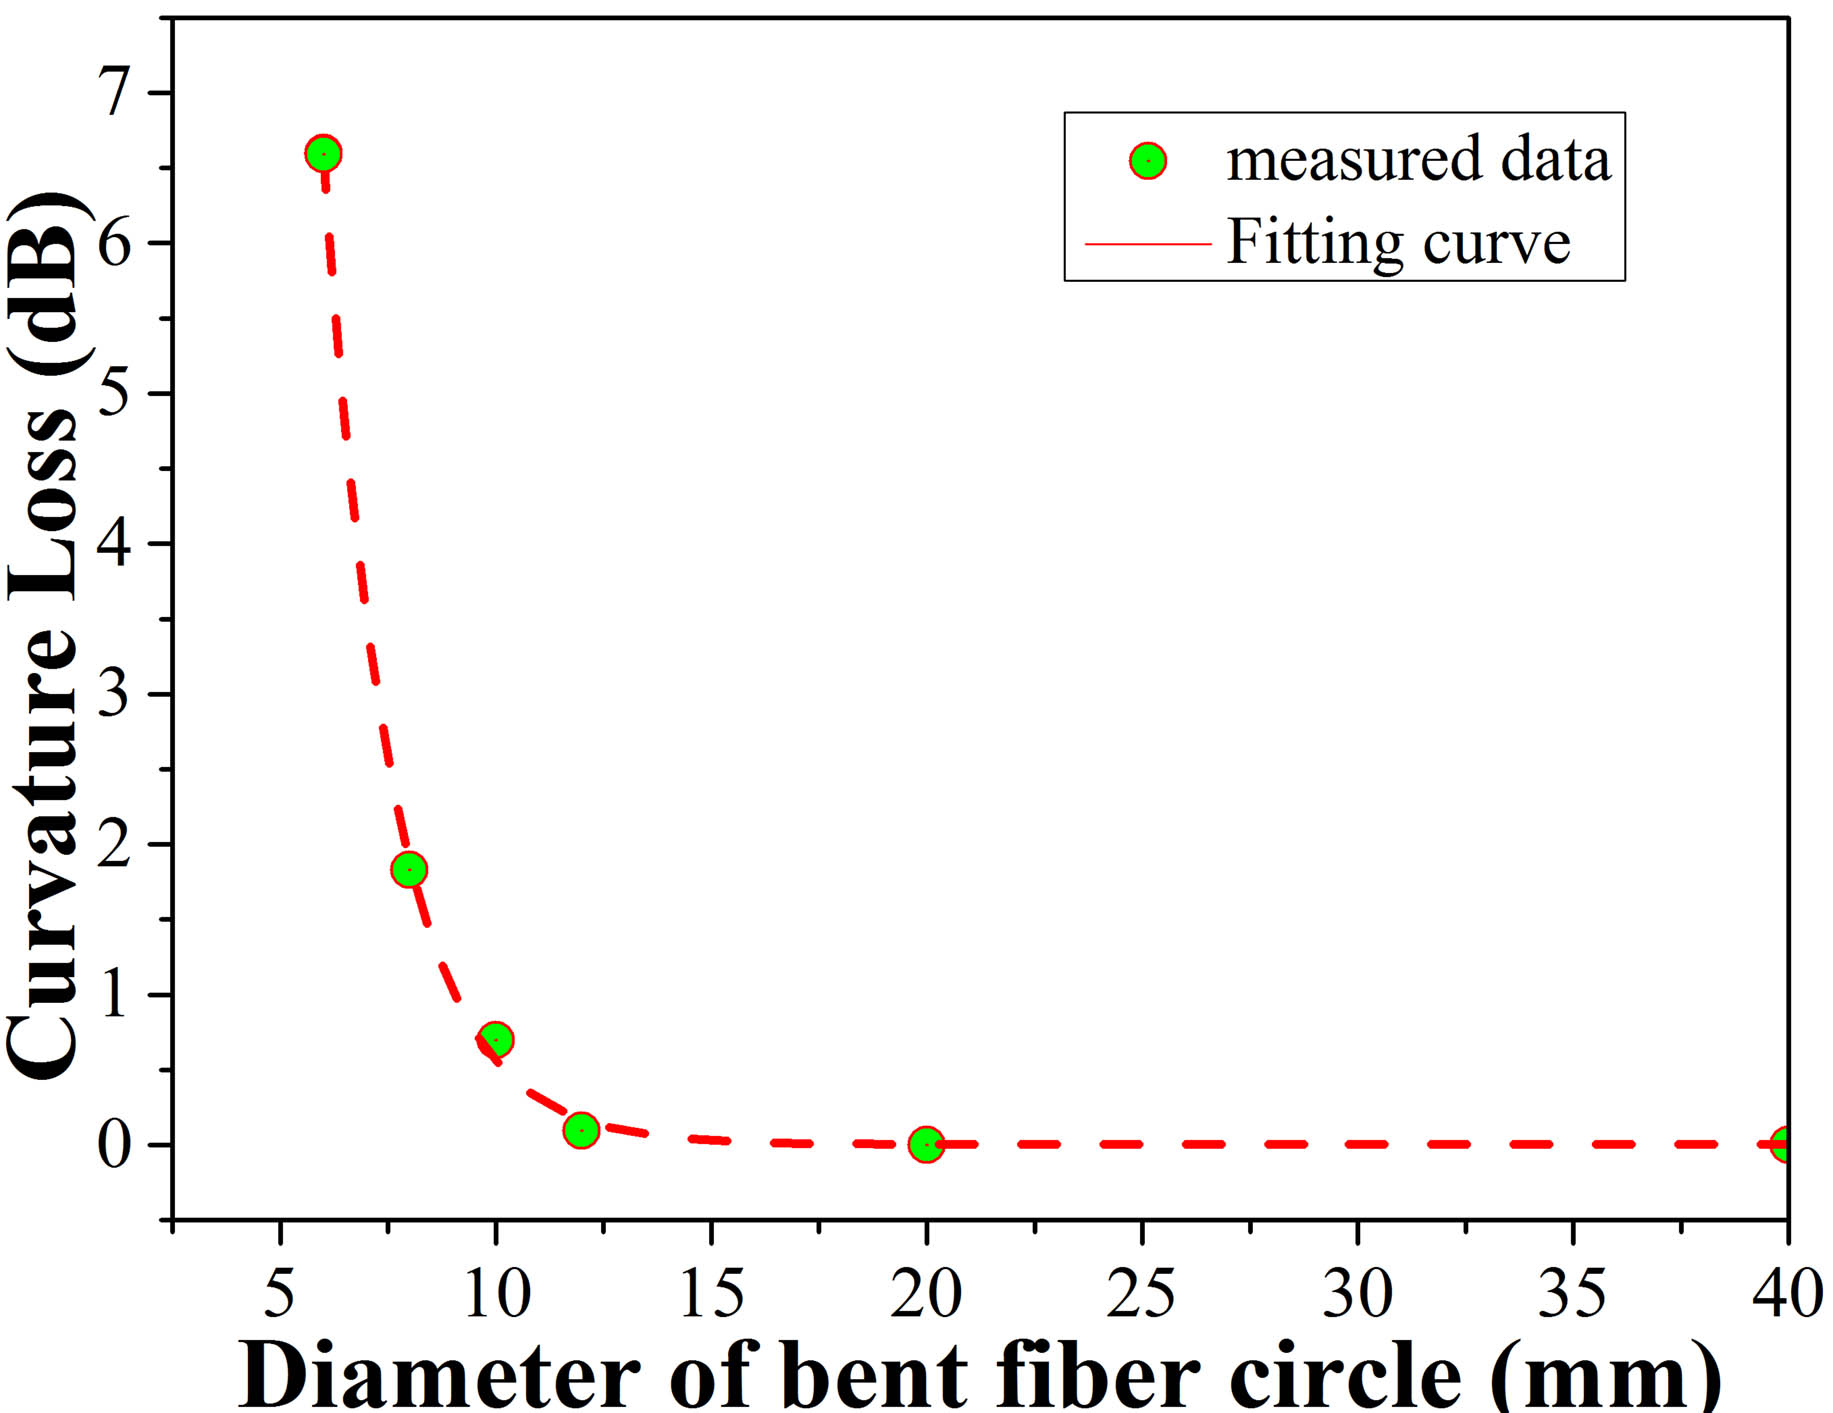 Relationship between the curvature loss and the diameter of the bent fiber circle.